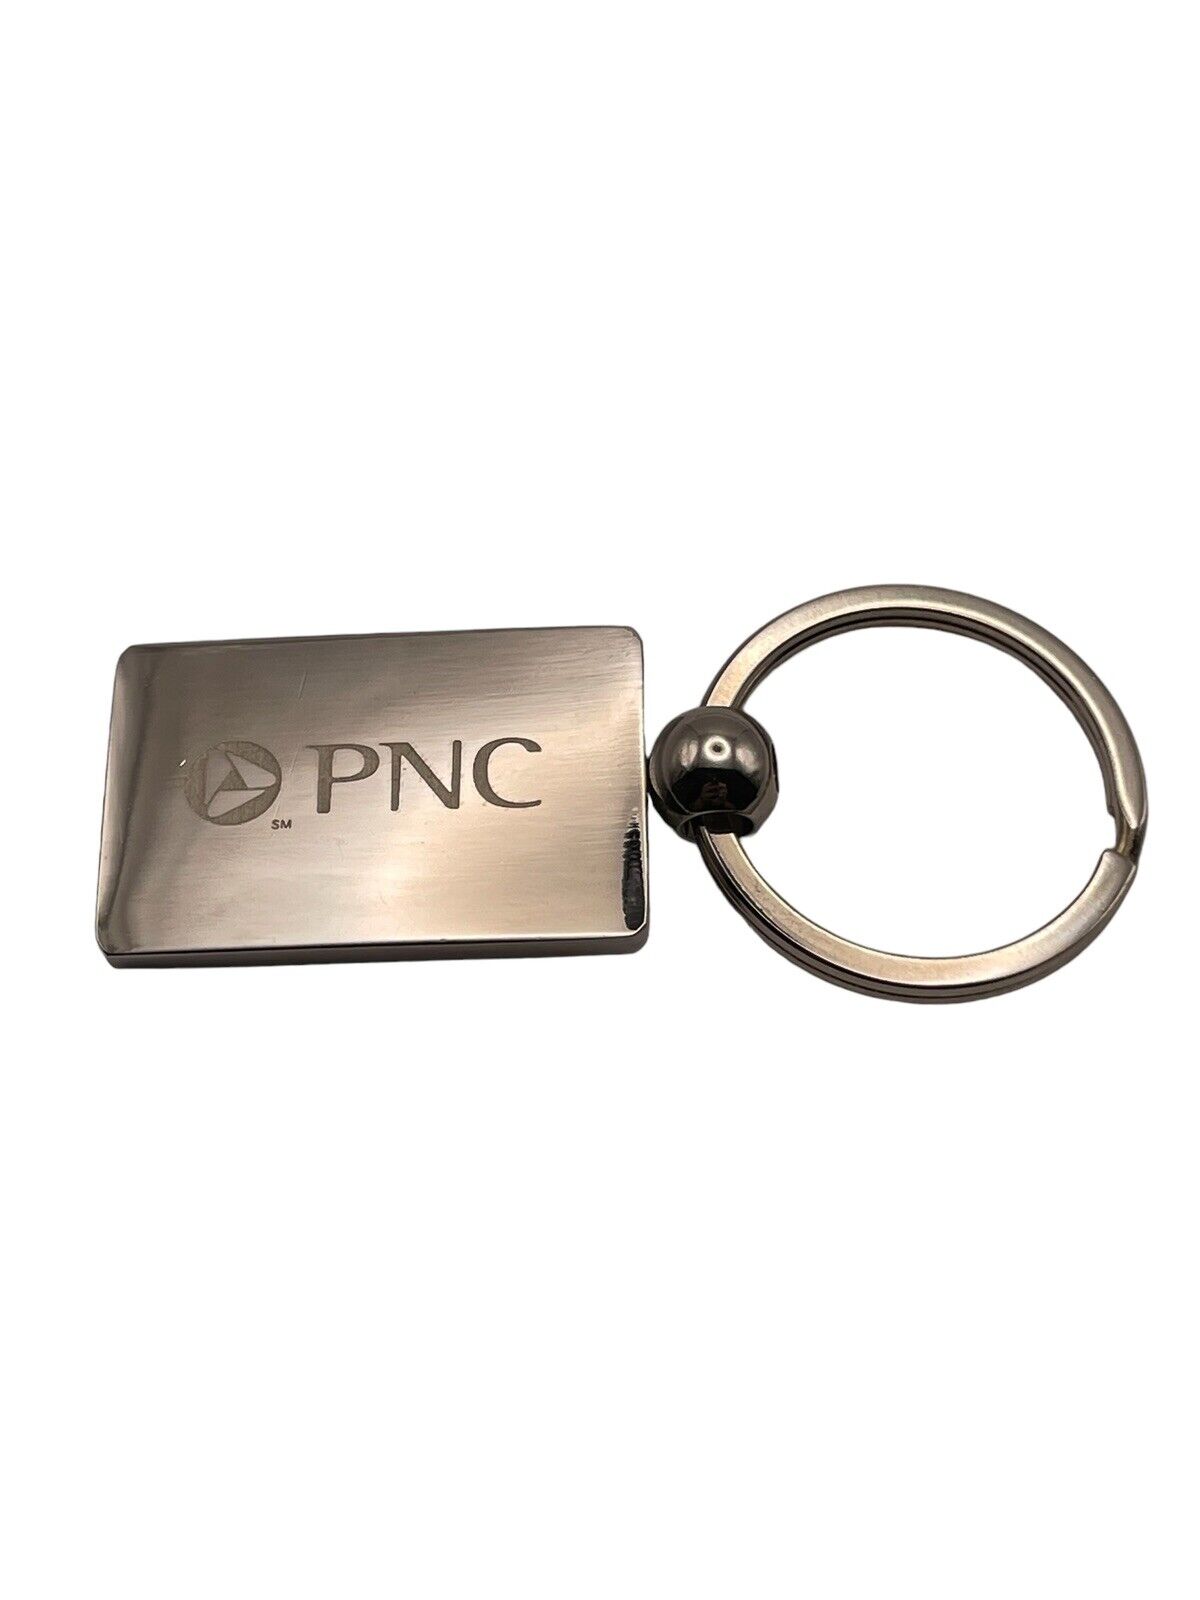 Vintage Keychain PNC BANK Key Ring Fob PA Financial Services Banking Silver Tone